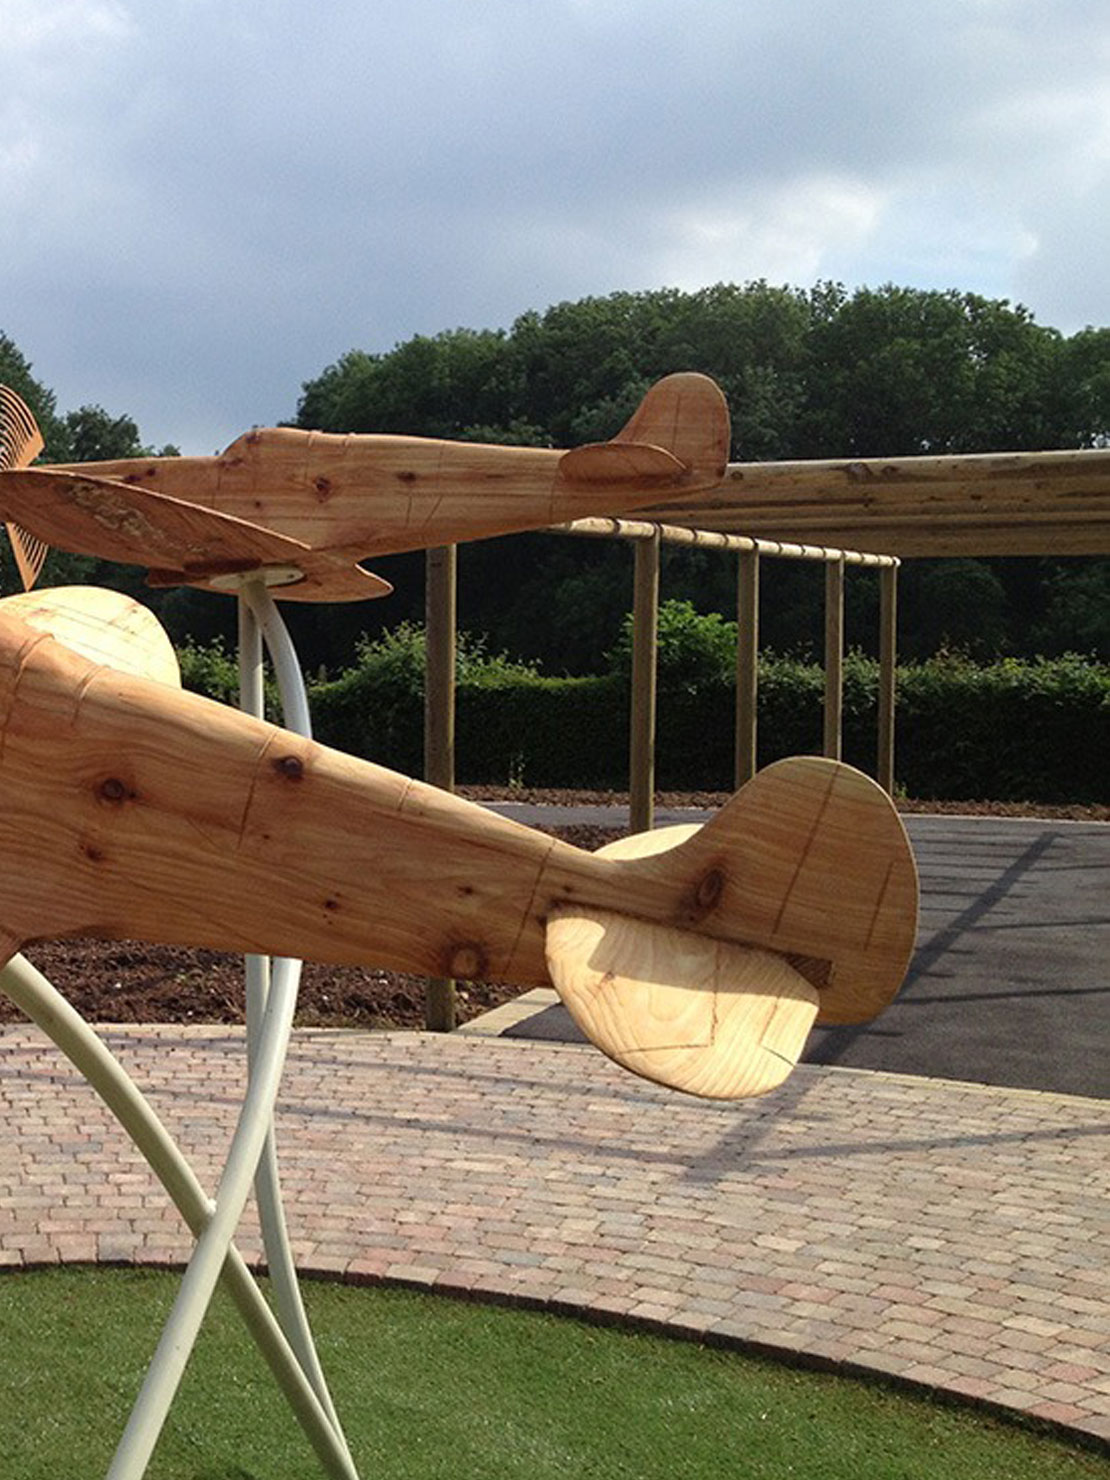 Carved wooden spitfires by Matthew Crabb